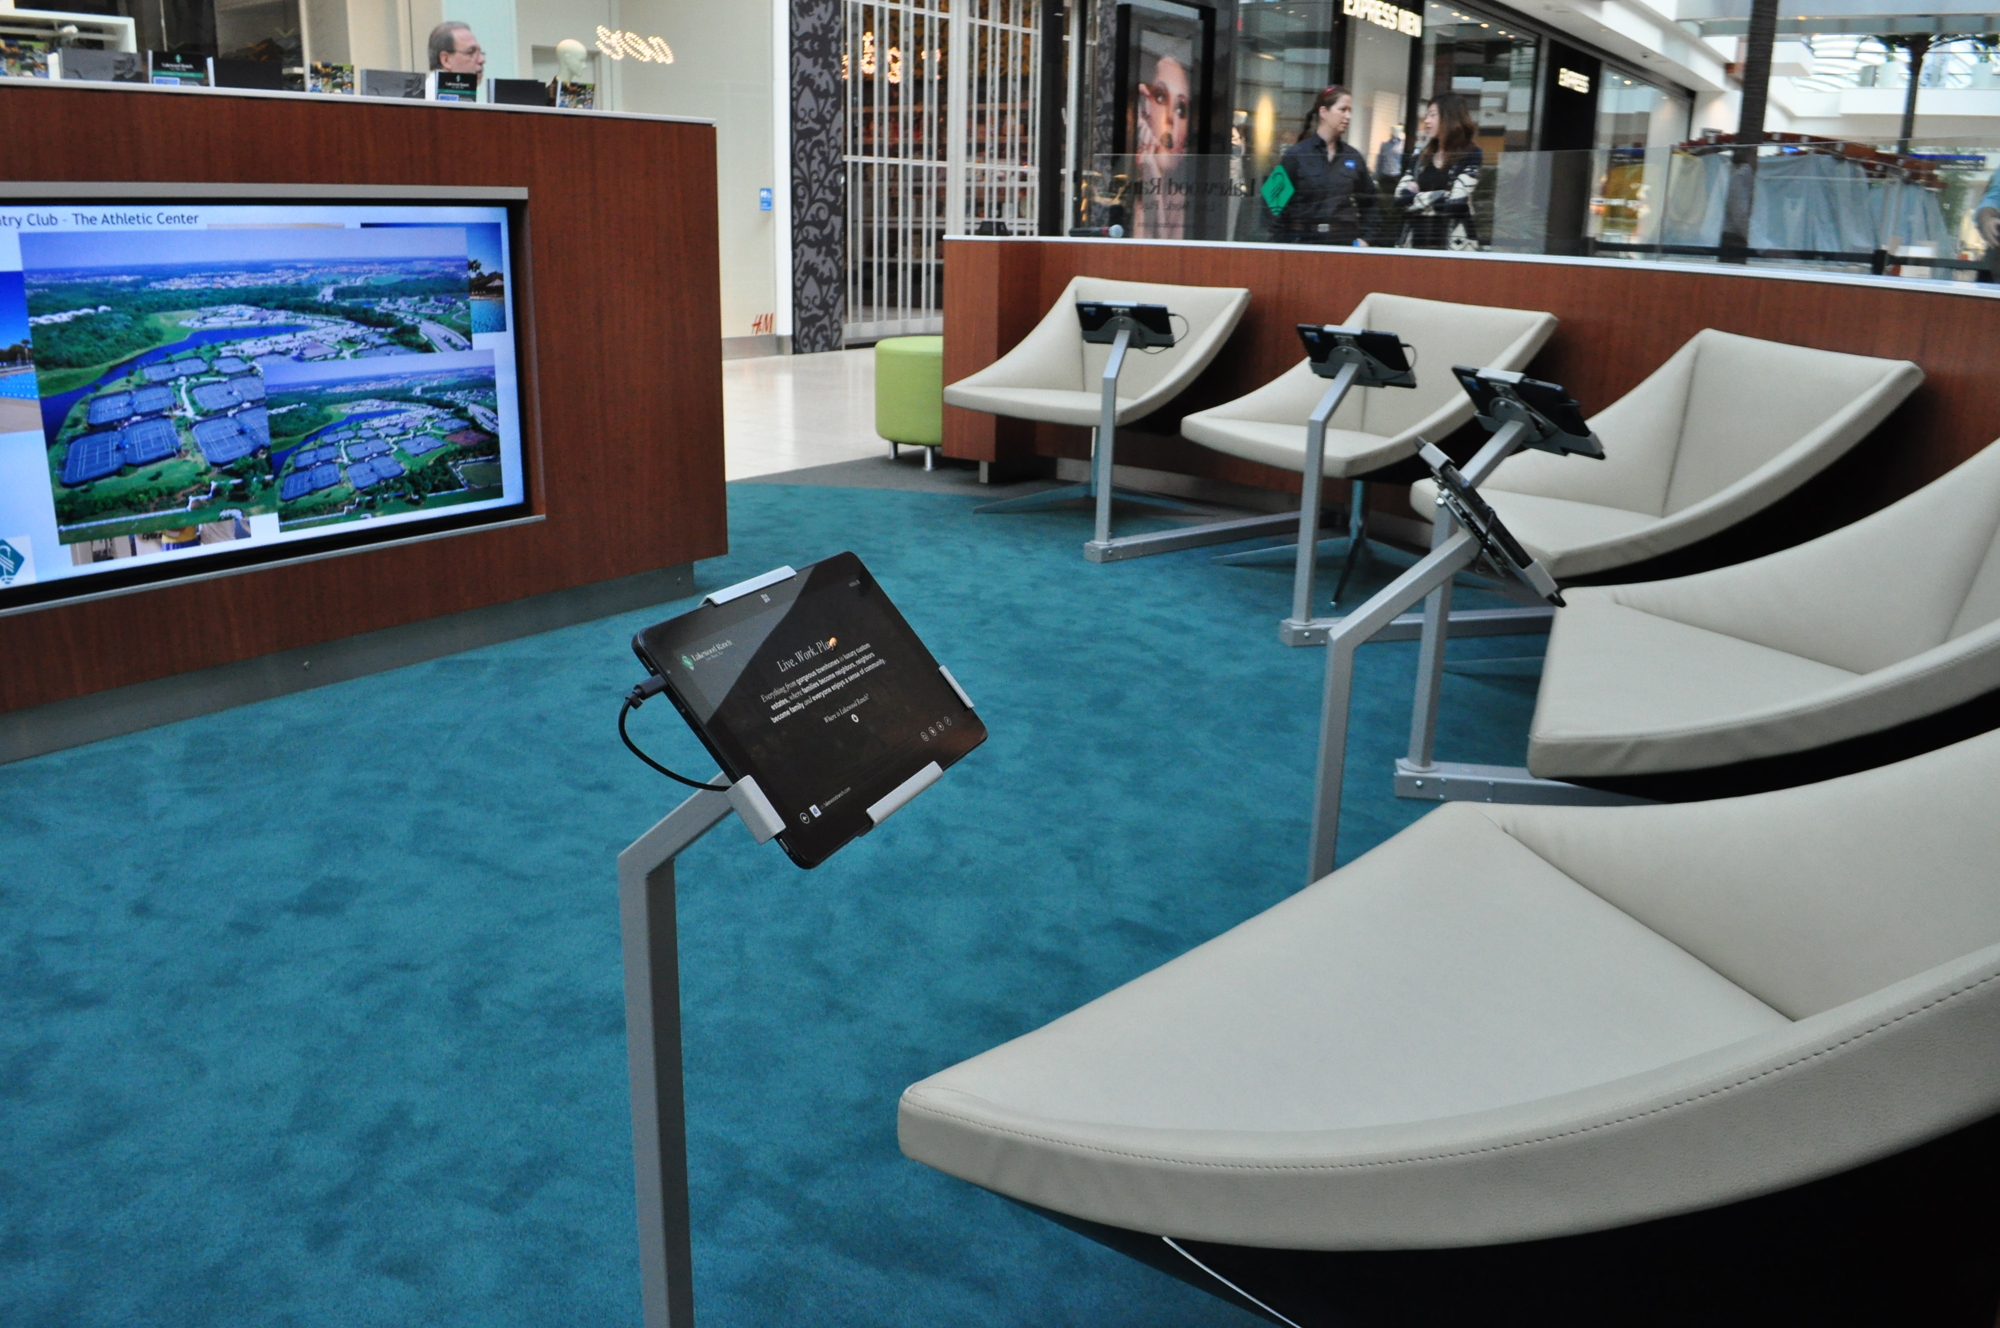 Guests at the lounge can scroll tablets for information about  builders and home models.